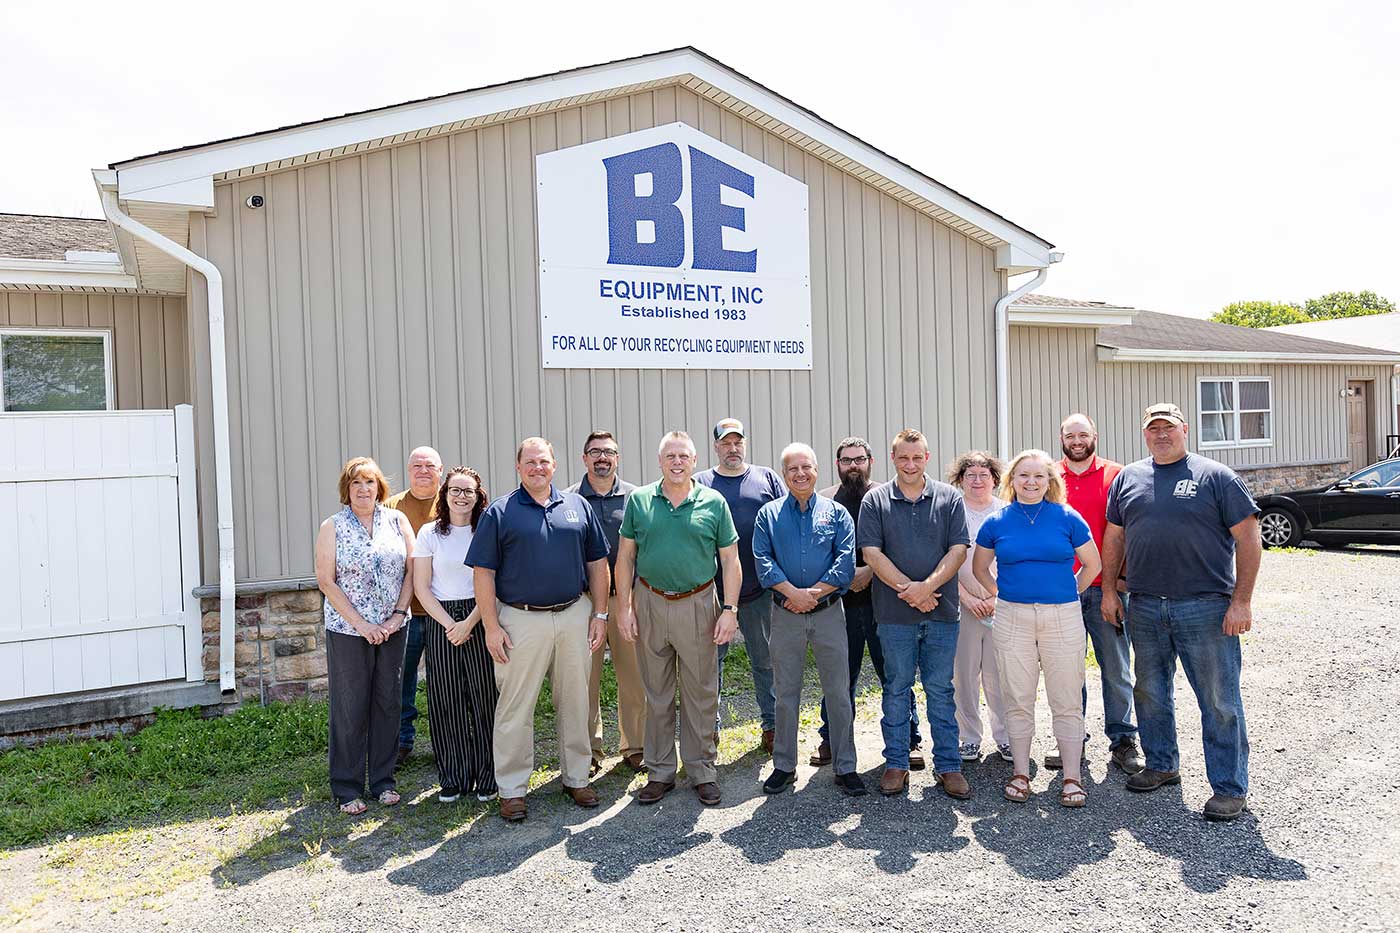 Our Team at BE Equipment, Inc